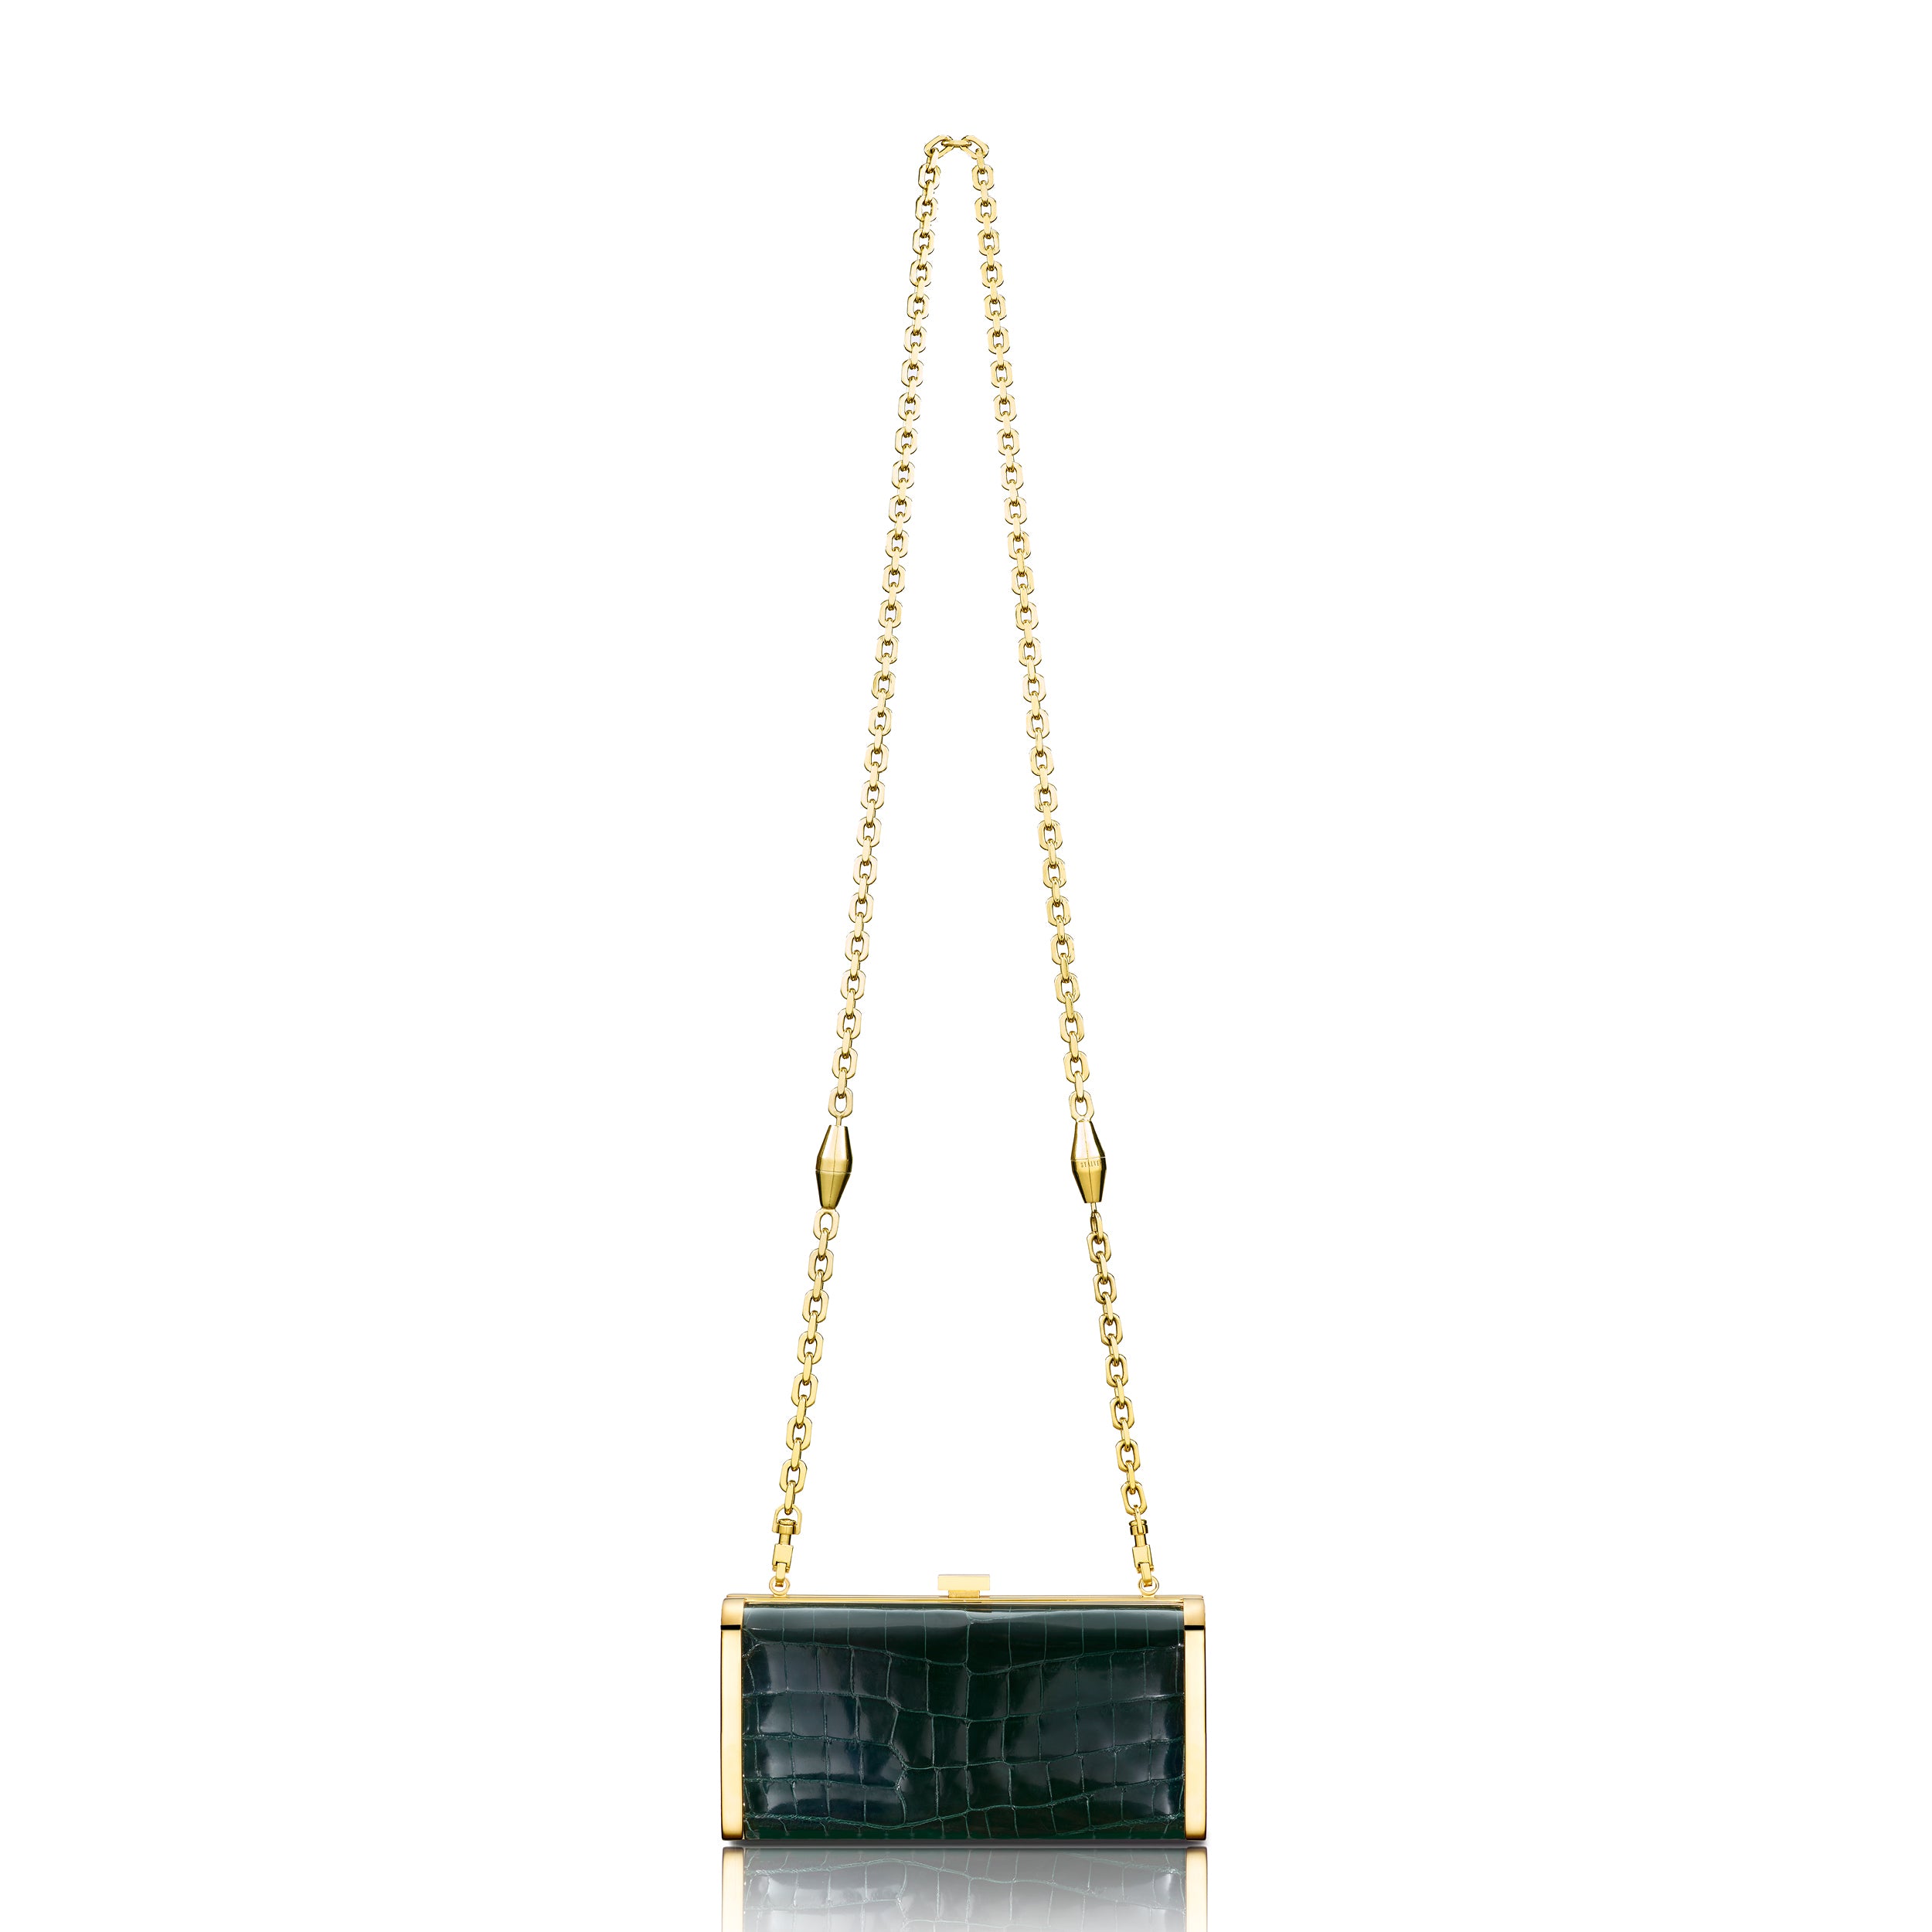 STALVEY Square Clutch in Emerald Alligator with 24kt Gold Hardware Front View with Chain